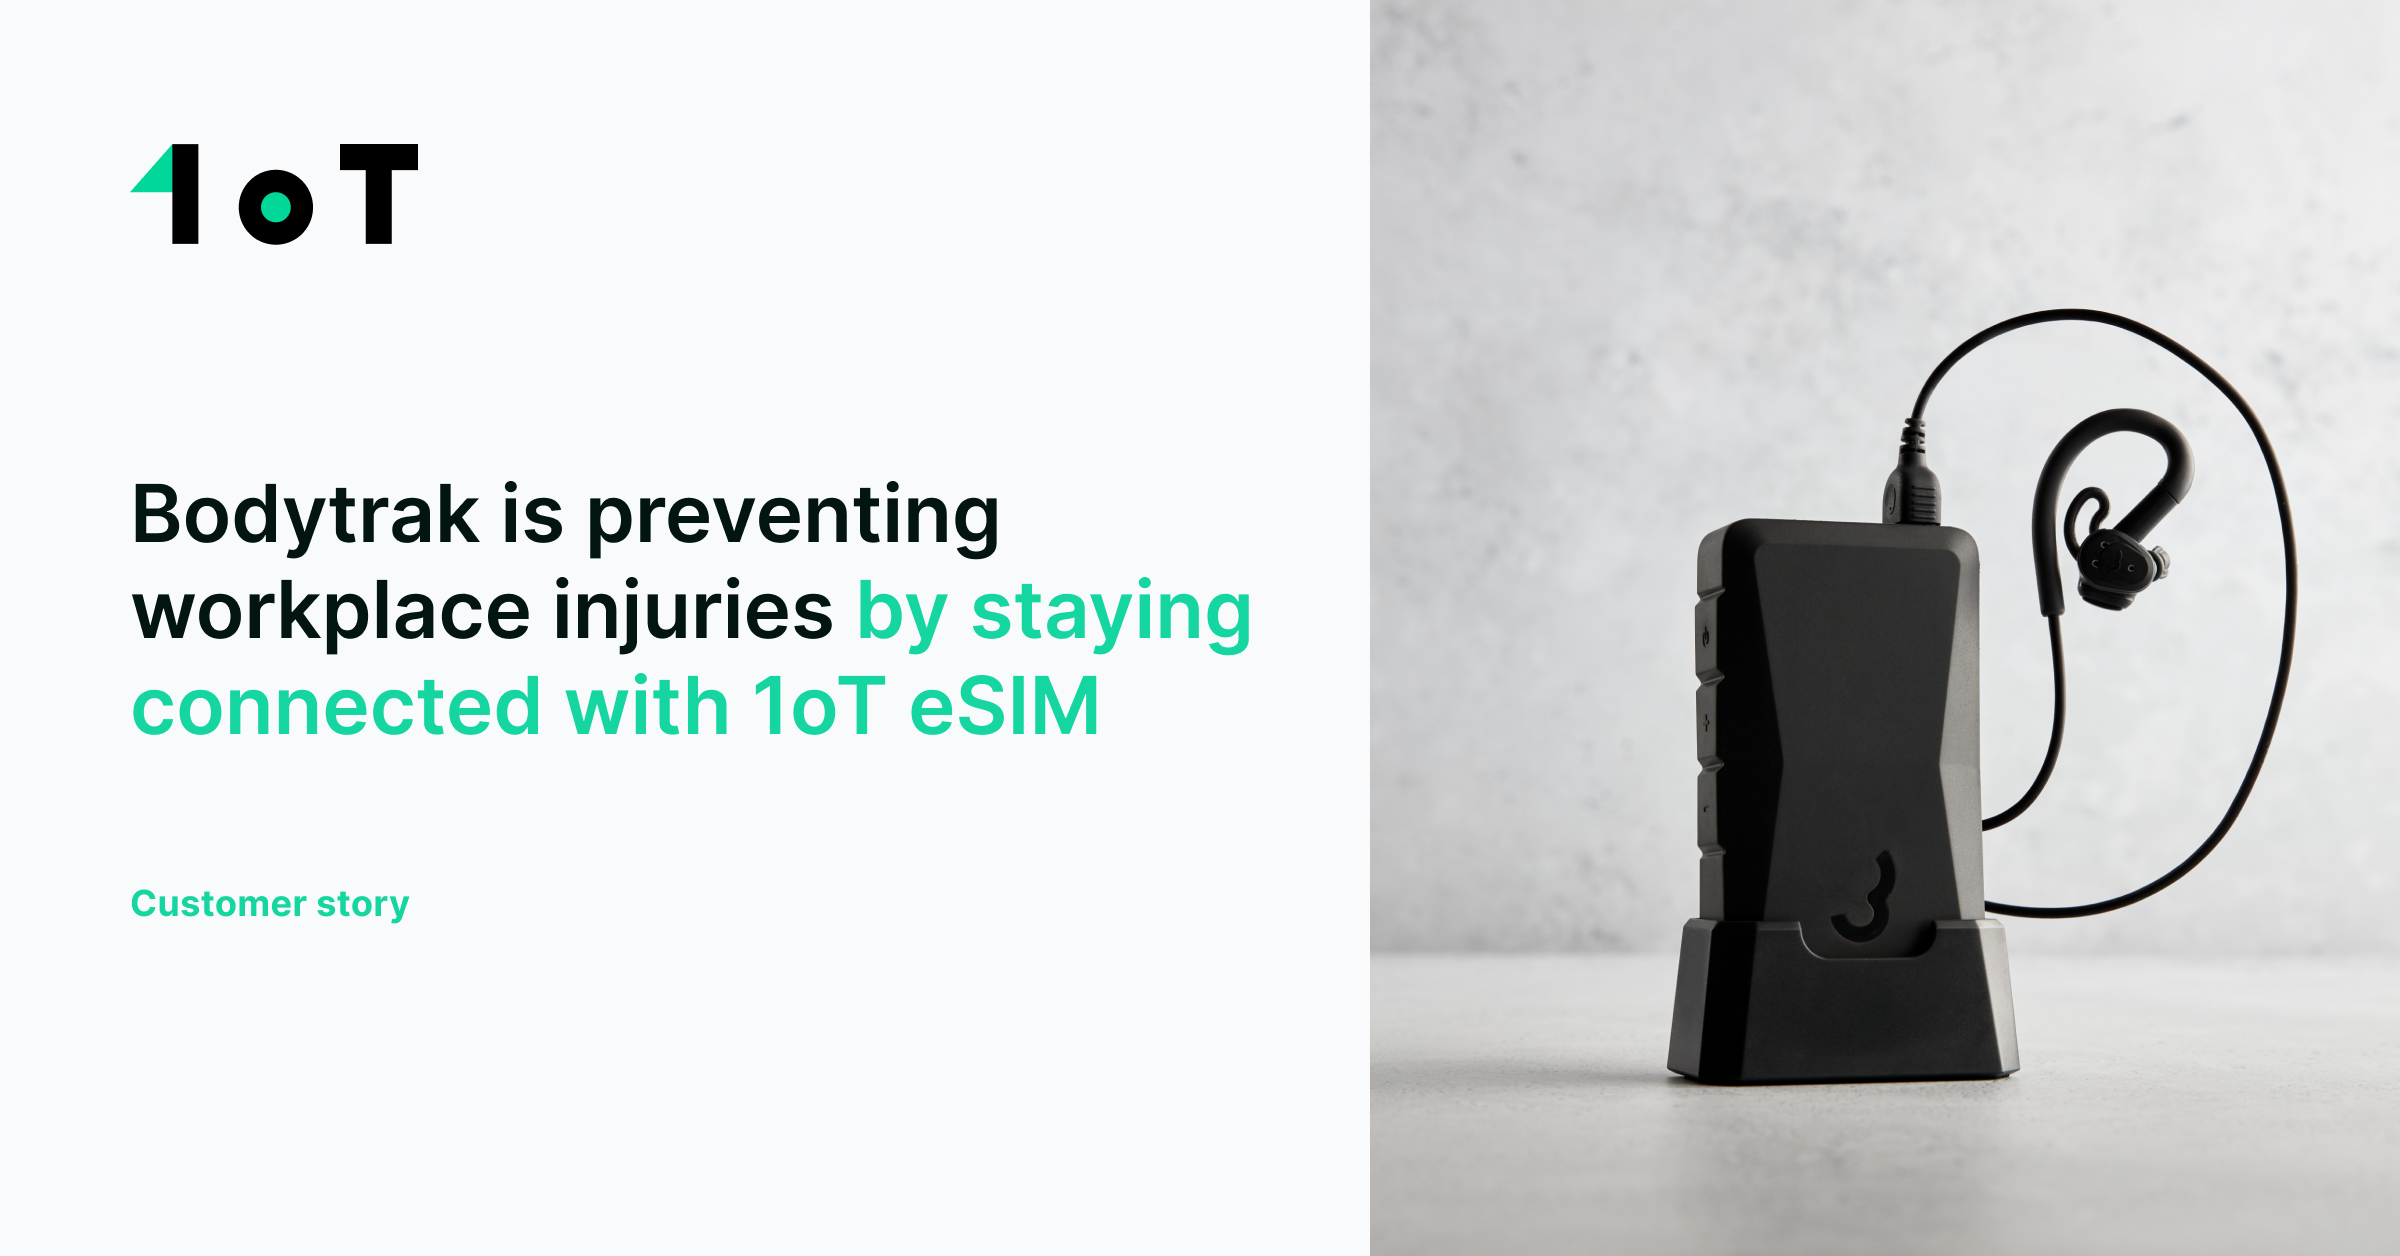 Article cover image for Bodytrak is preventing workplace injuries by staying connected with 1oT eSIM